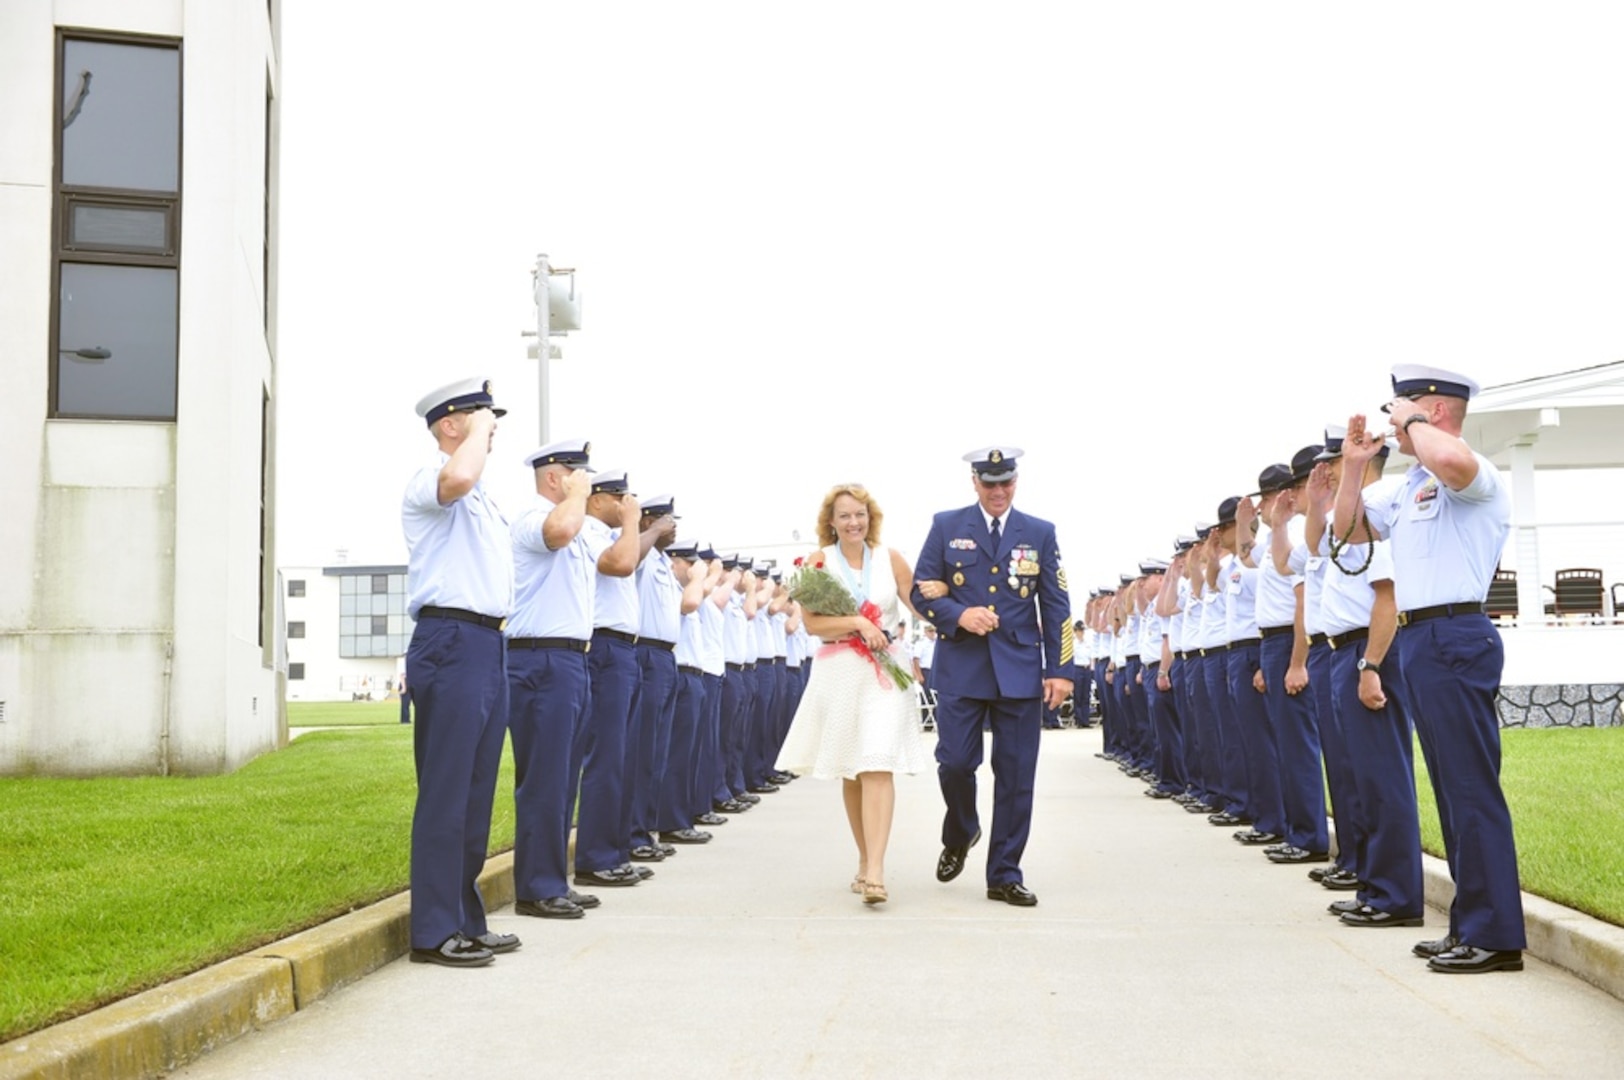 Master Chief Petty Officer Michael P. Leavitt (ret.) and his wife, Debra, depart a change-of-watch ceremony Thursday, May 22, 2014 at Coast Guard Training Center Cape May, N.J. After the change-of watch ceremony, in which Leavitt transferred his duties as MCPOCG to Master Chief Petty Officer Steven W. Cantrell, Leavitt retired following 32 years of Coast Guard service. U.S Coast Guard photo by Petty Officer 3rd Class Cynthia Oldham